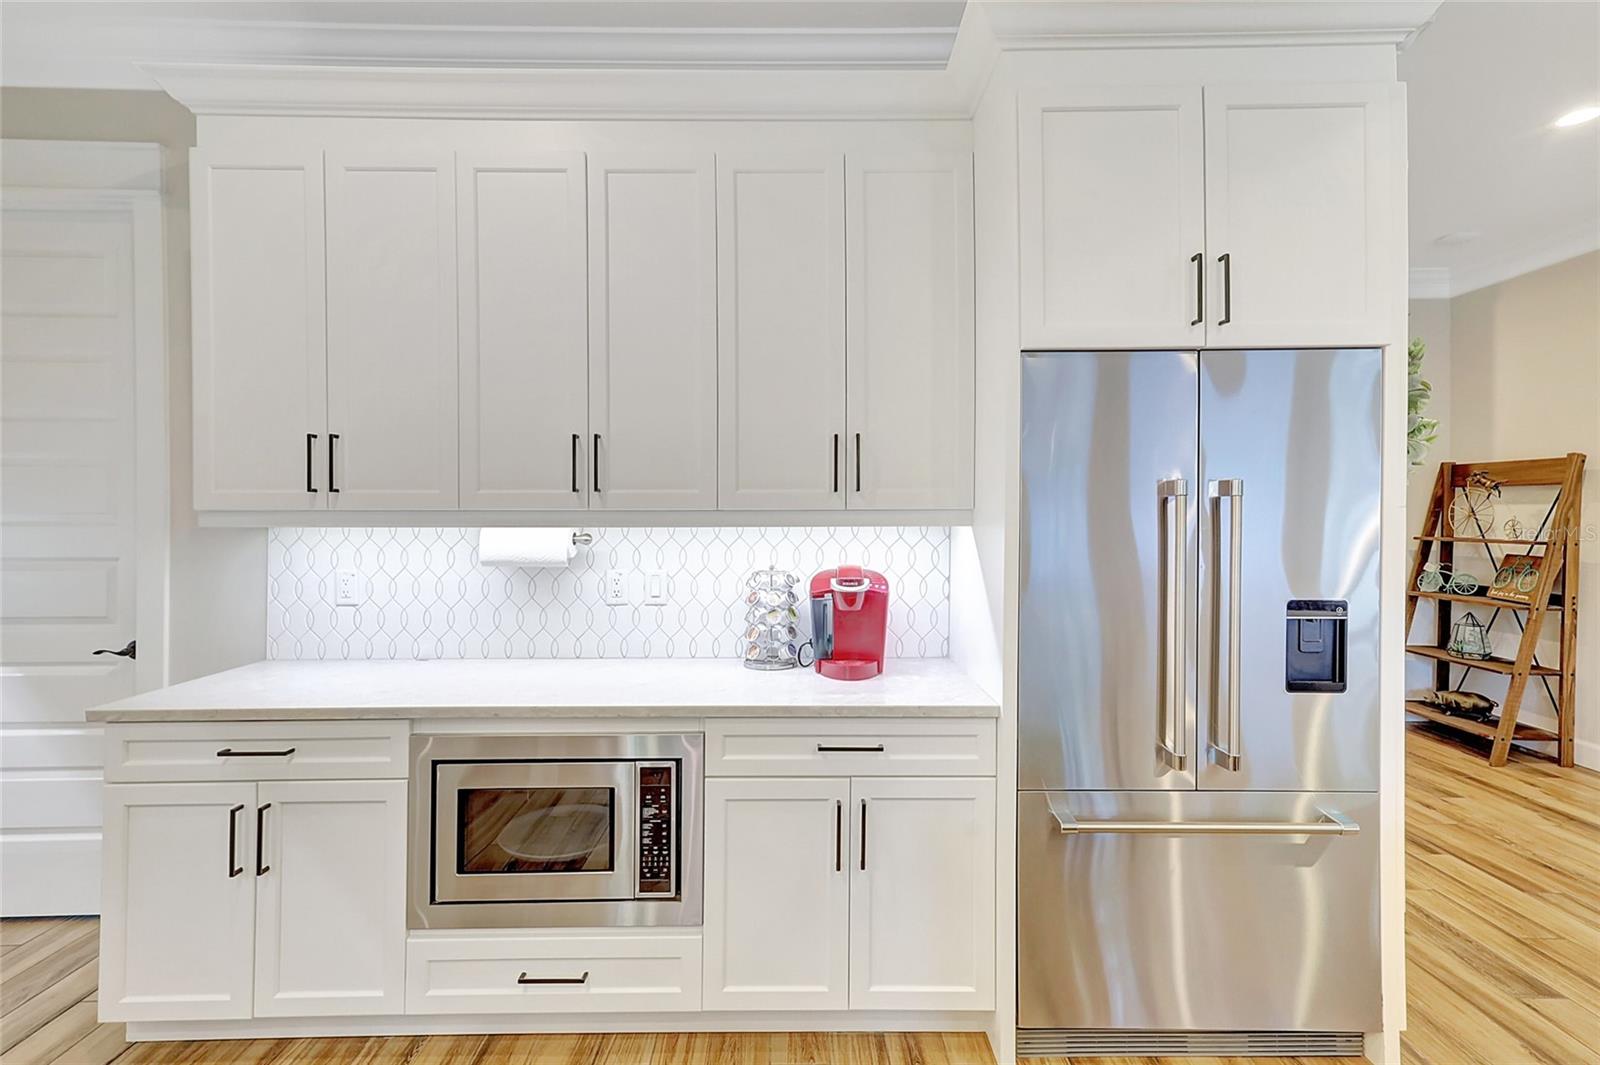 Undercabinet lighting, crown moldings and Fisher Paykel appliances.